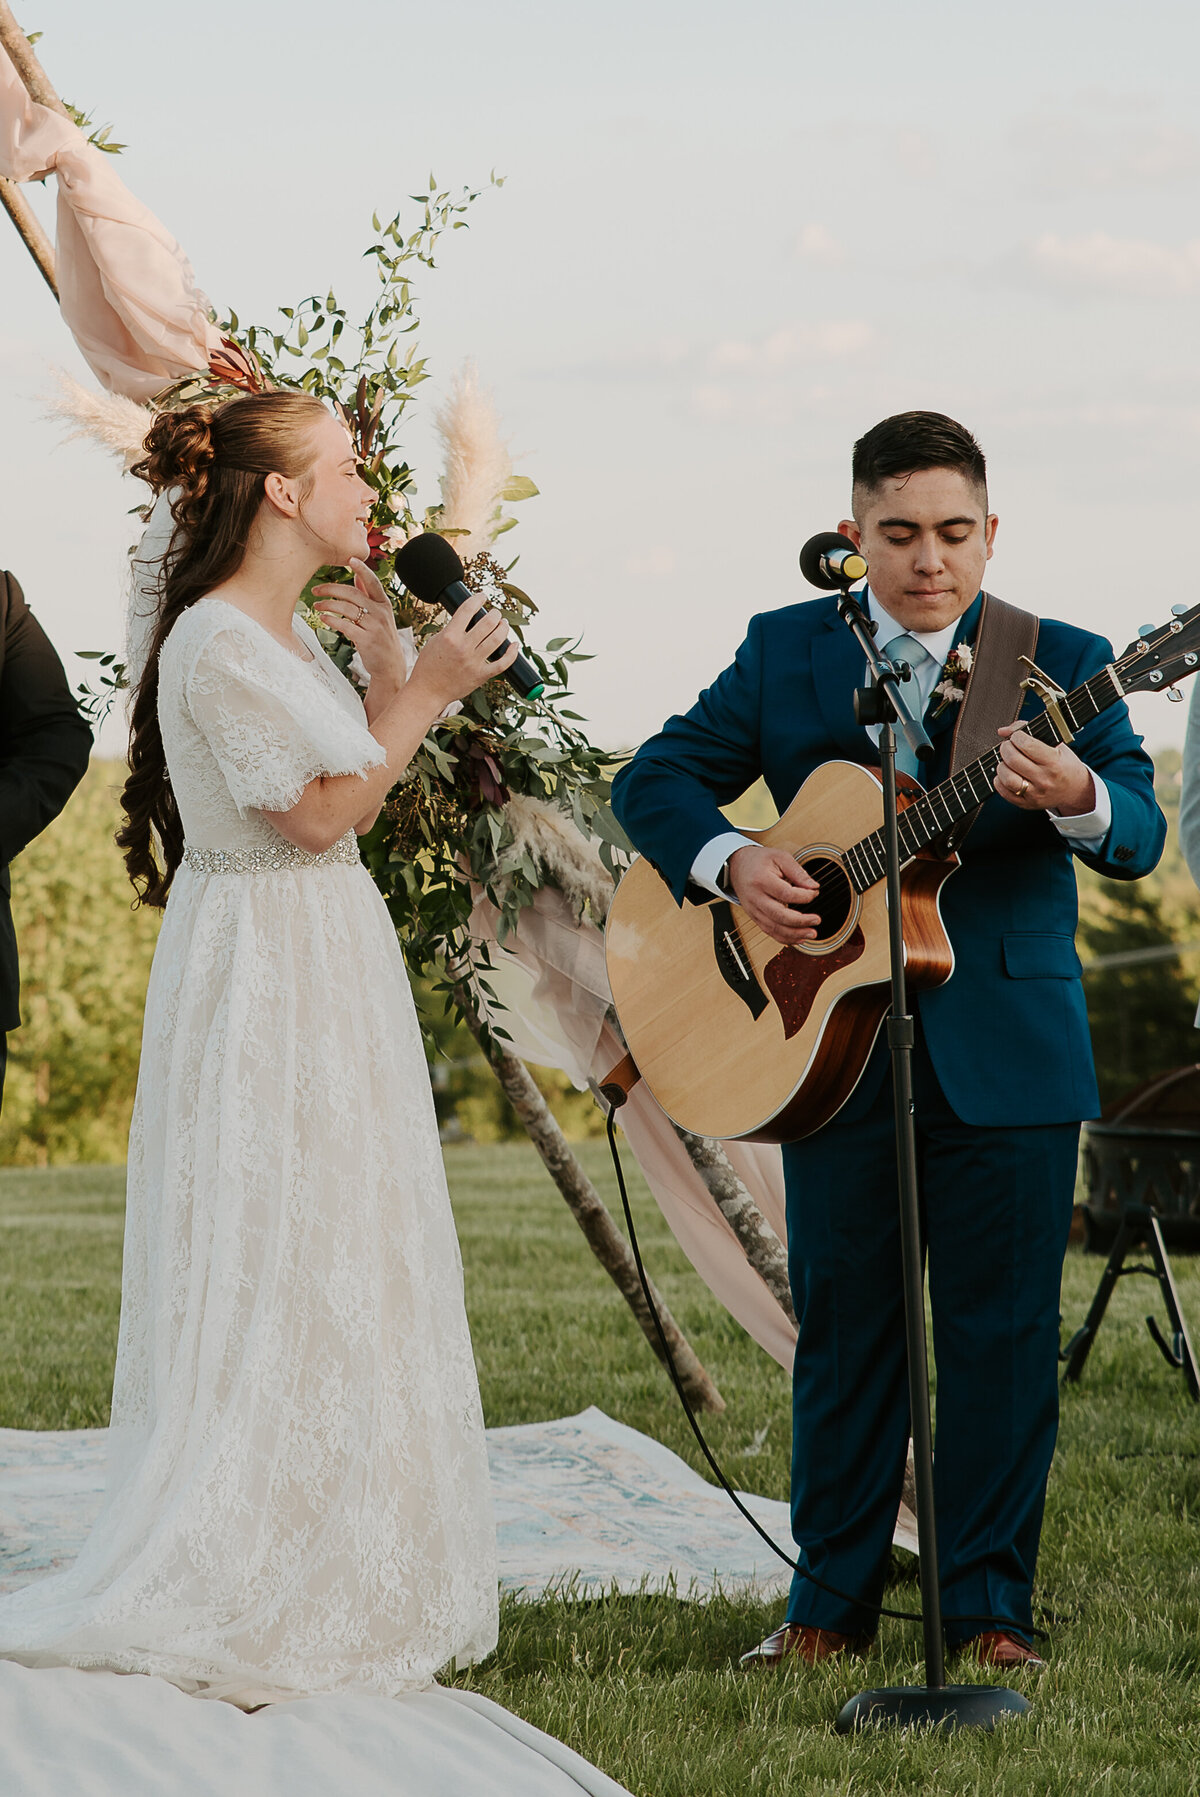 Intimate wedding in the mountains of North Carolina, bride and groom playing a song together at the ceremony.